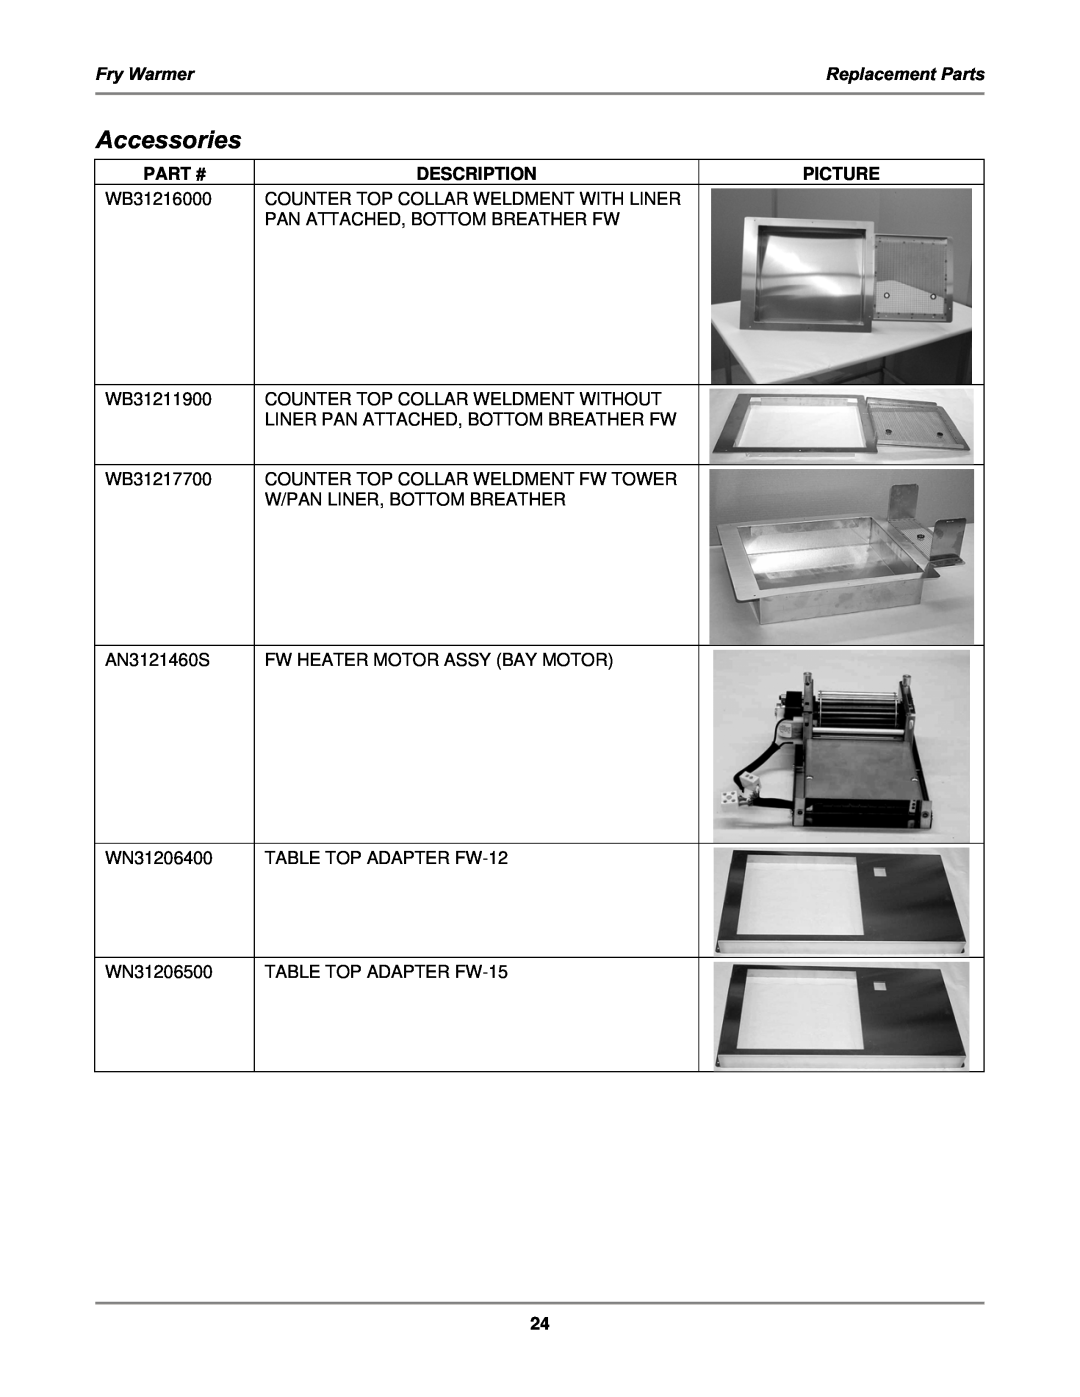 Bakers Pride Oven FW-12T, FW-15T, FW-15DTO manual Accessories, Fry Warmer, Replacement Parts, Part #, Description, Picture 